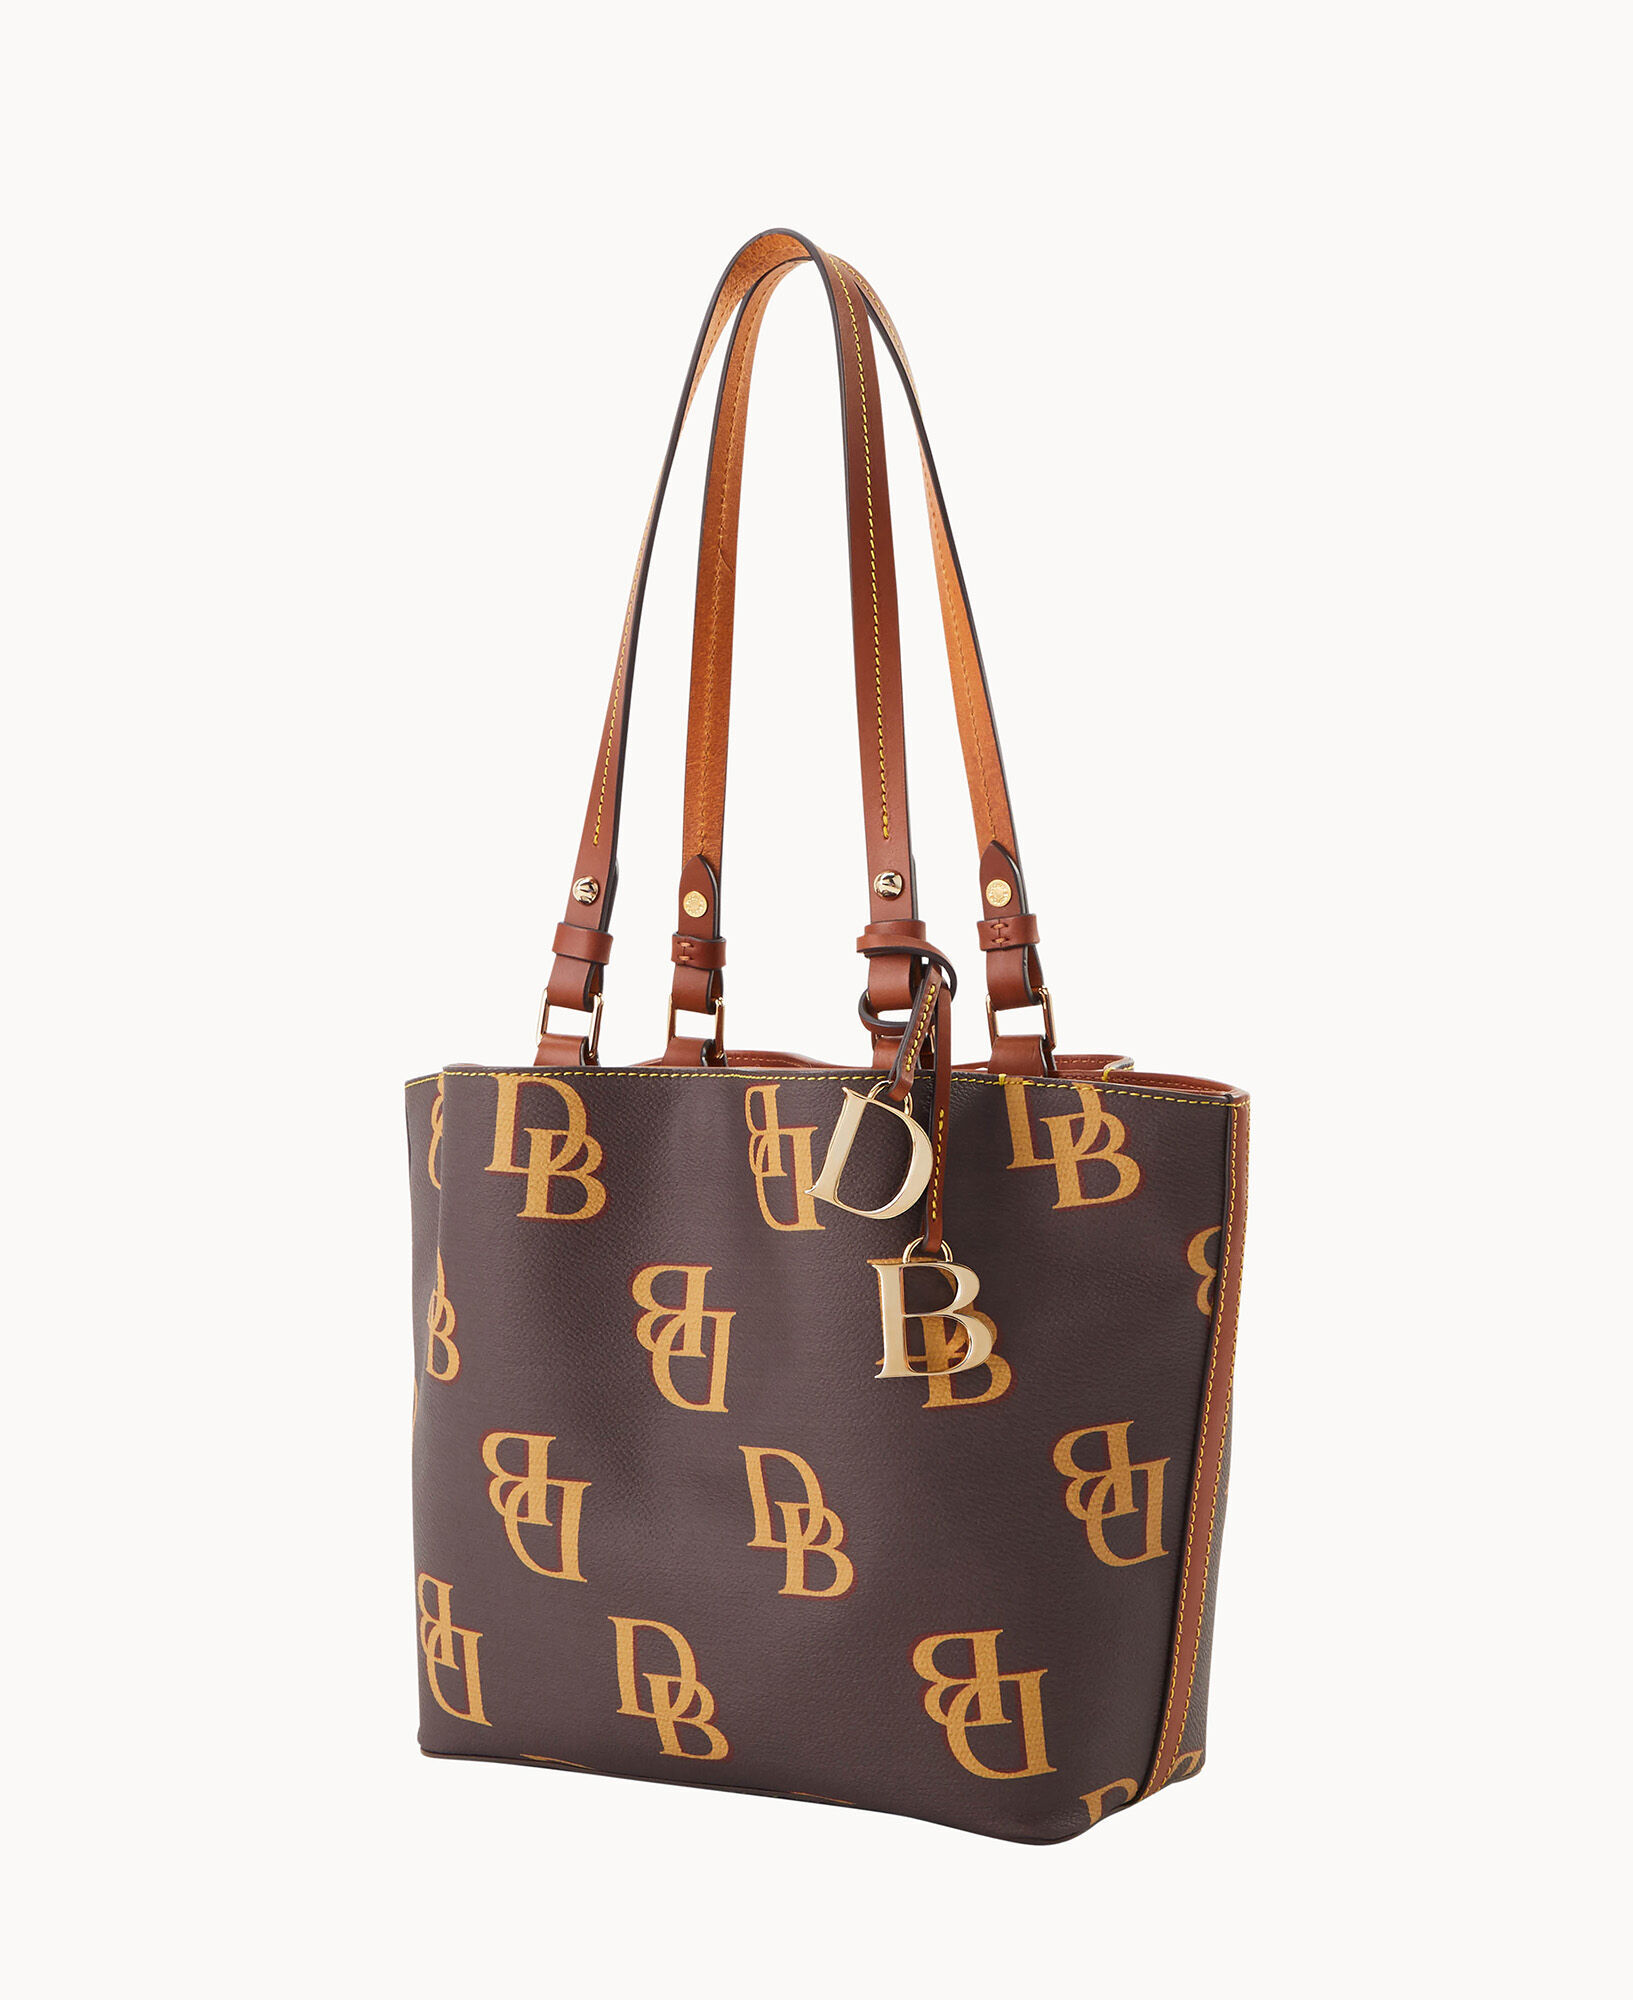 A Small Request of Louis Vuitton: Make Women's Bags in Monogram